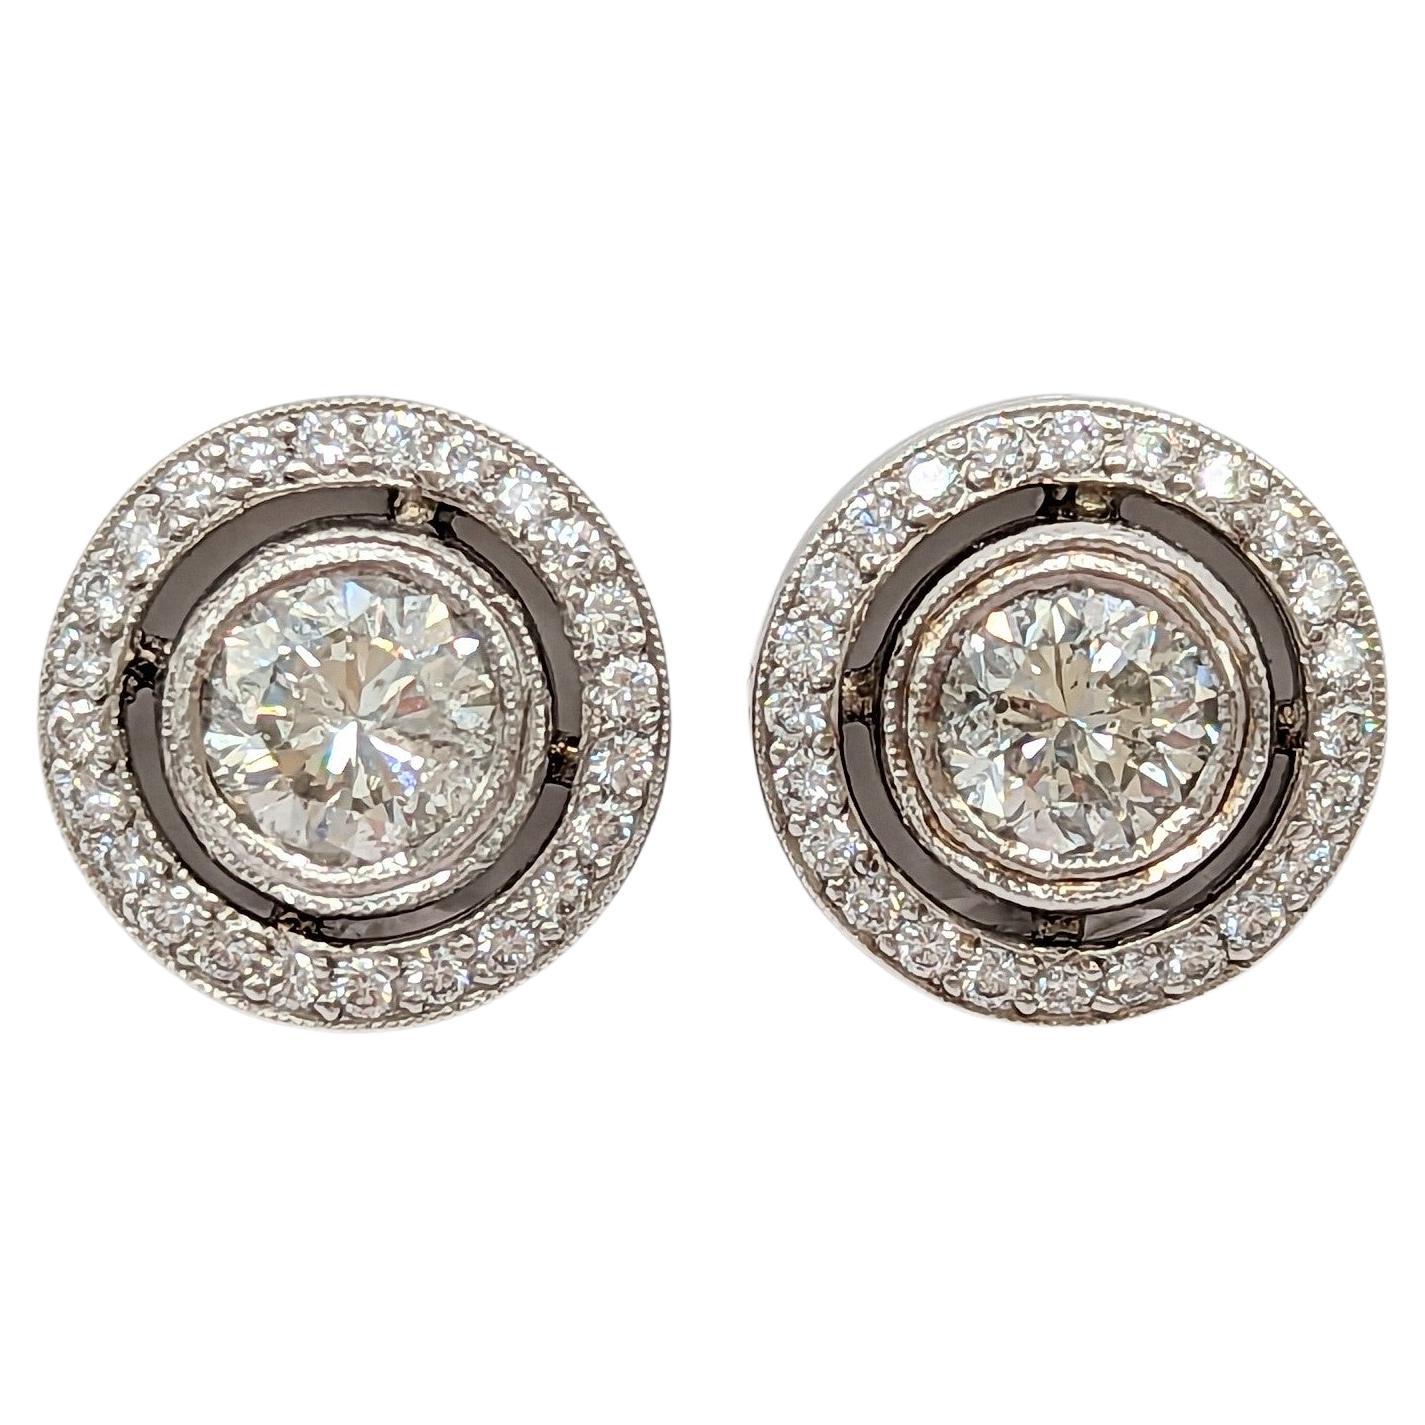 White Round Diamonds with Halo Earring Studs in 18K White Gold For Sale